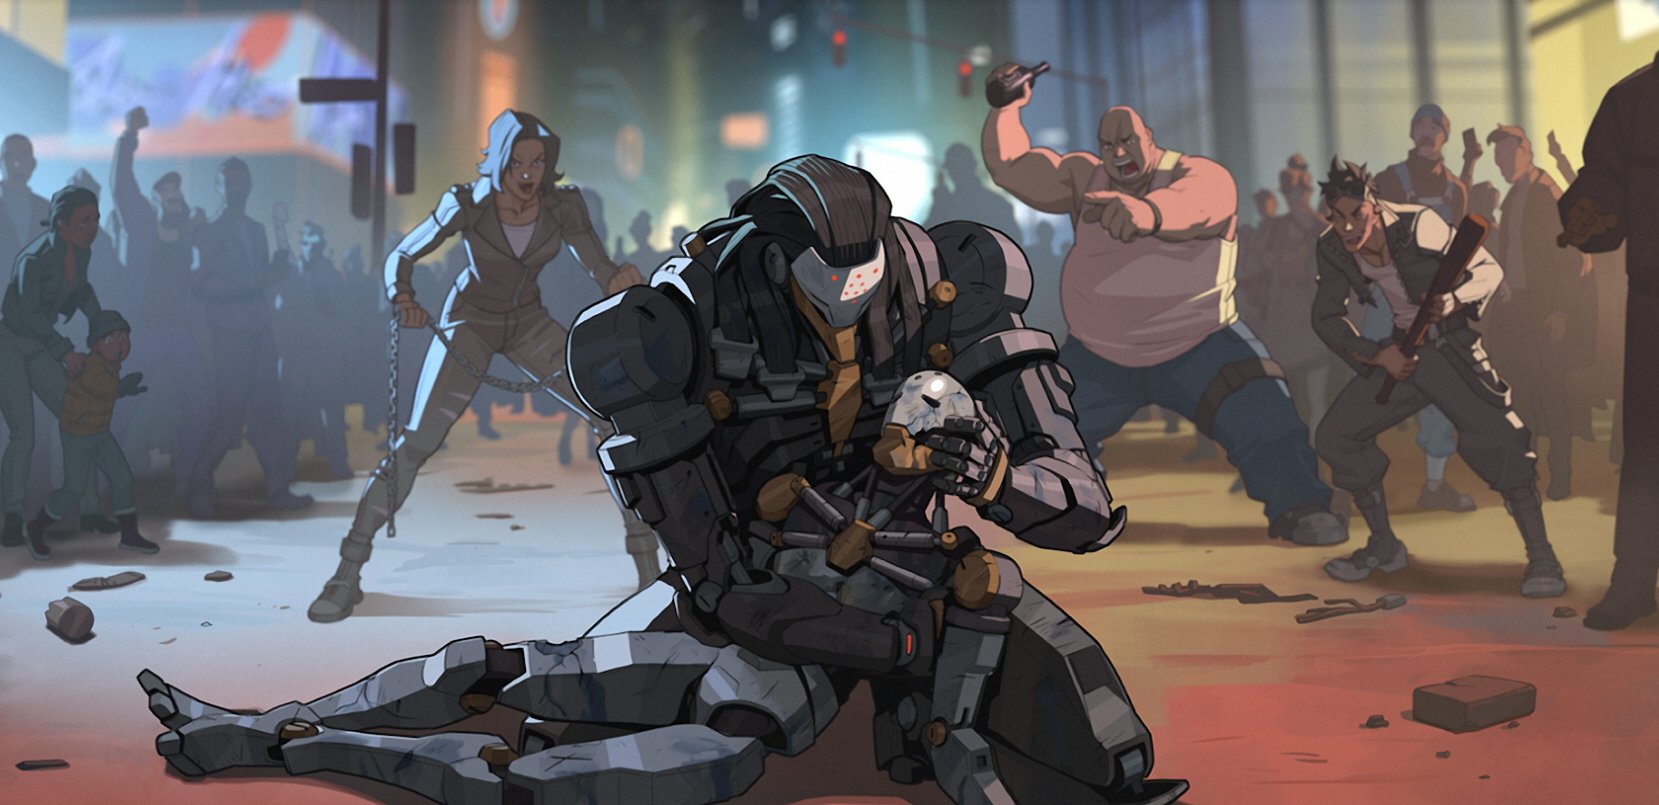 Ramattra holds a deceased omnic.